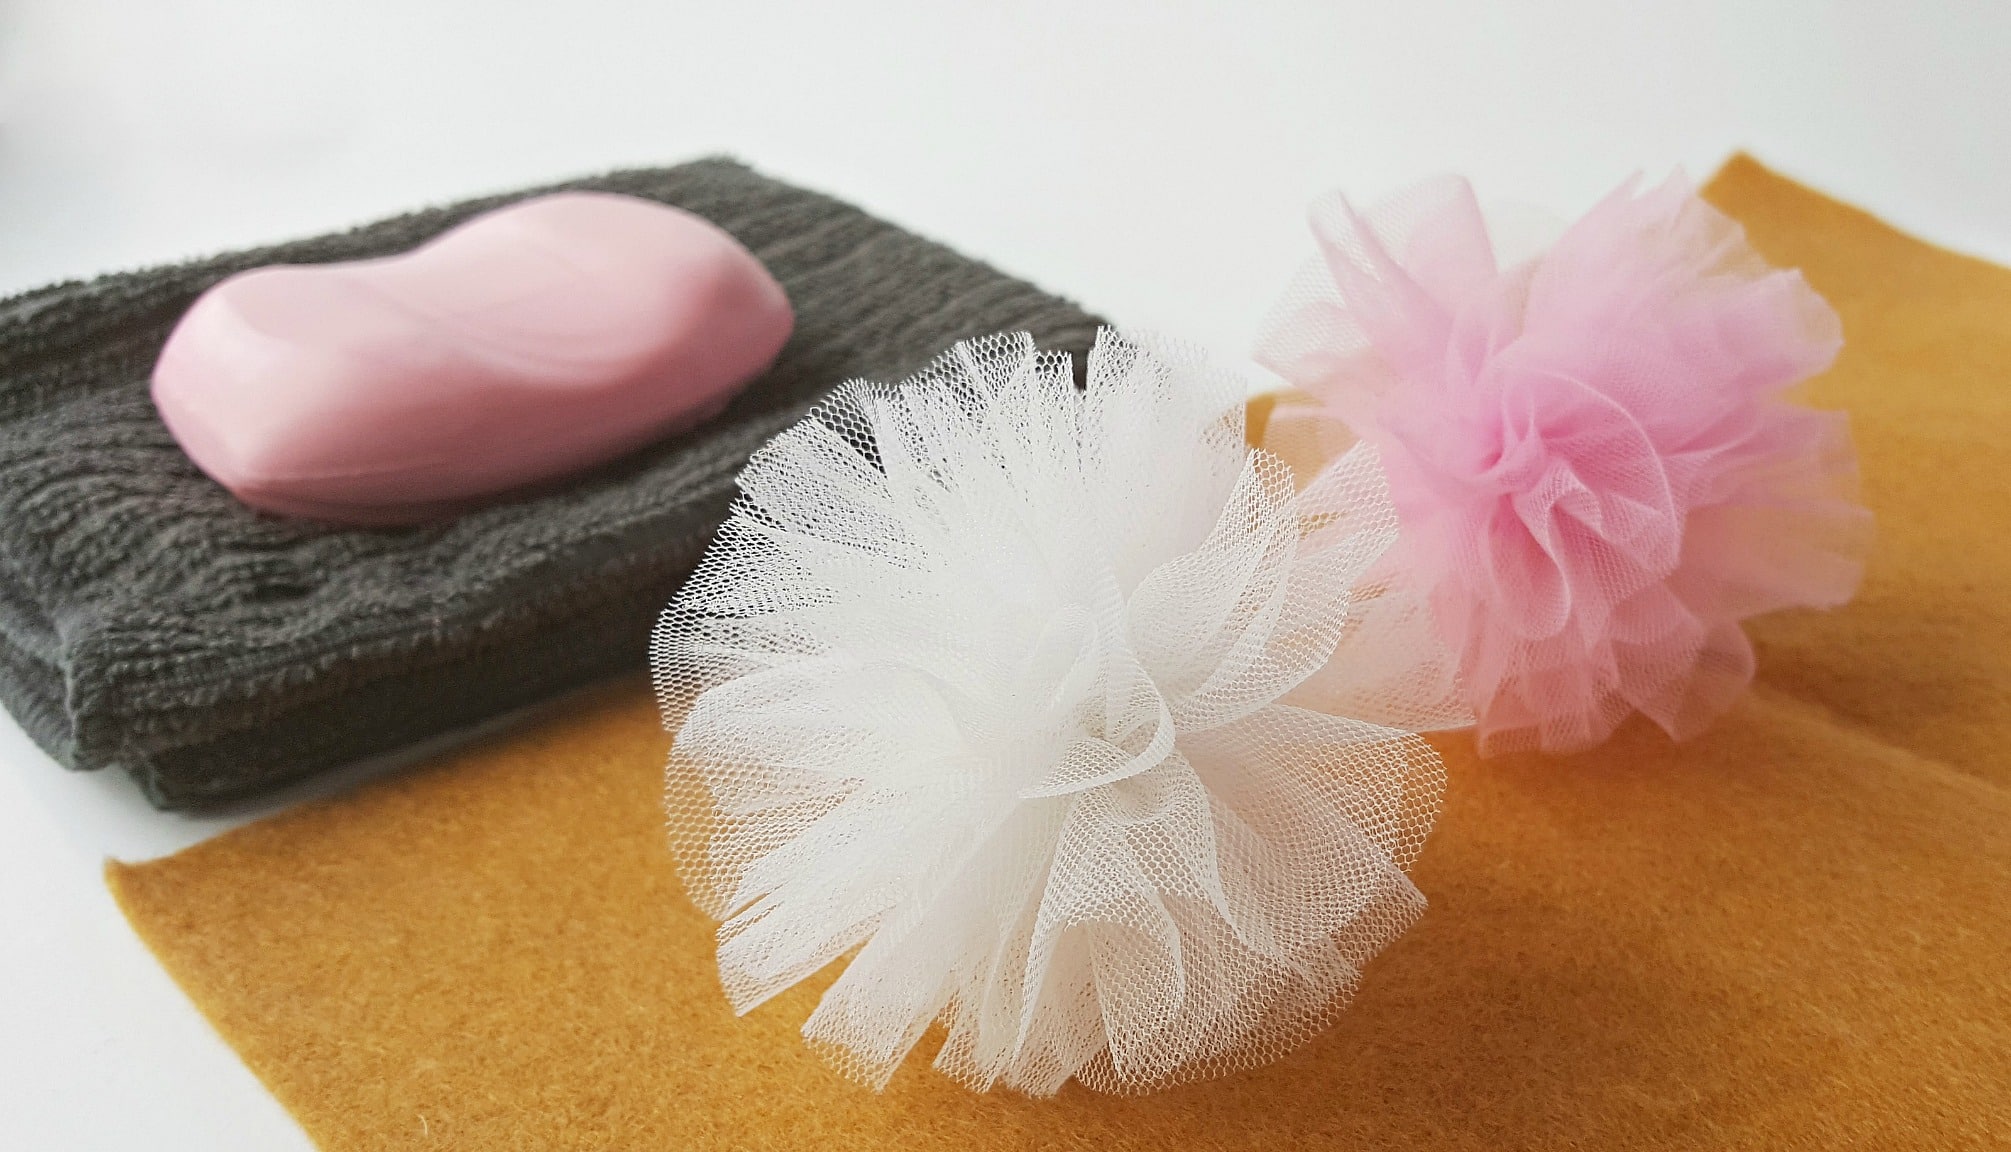 A pink and white soap and tulle flower on a piece of cloth.